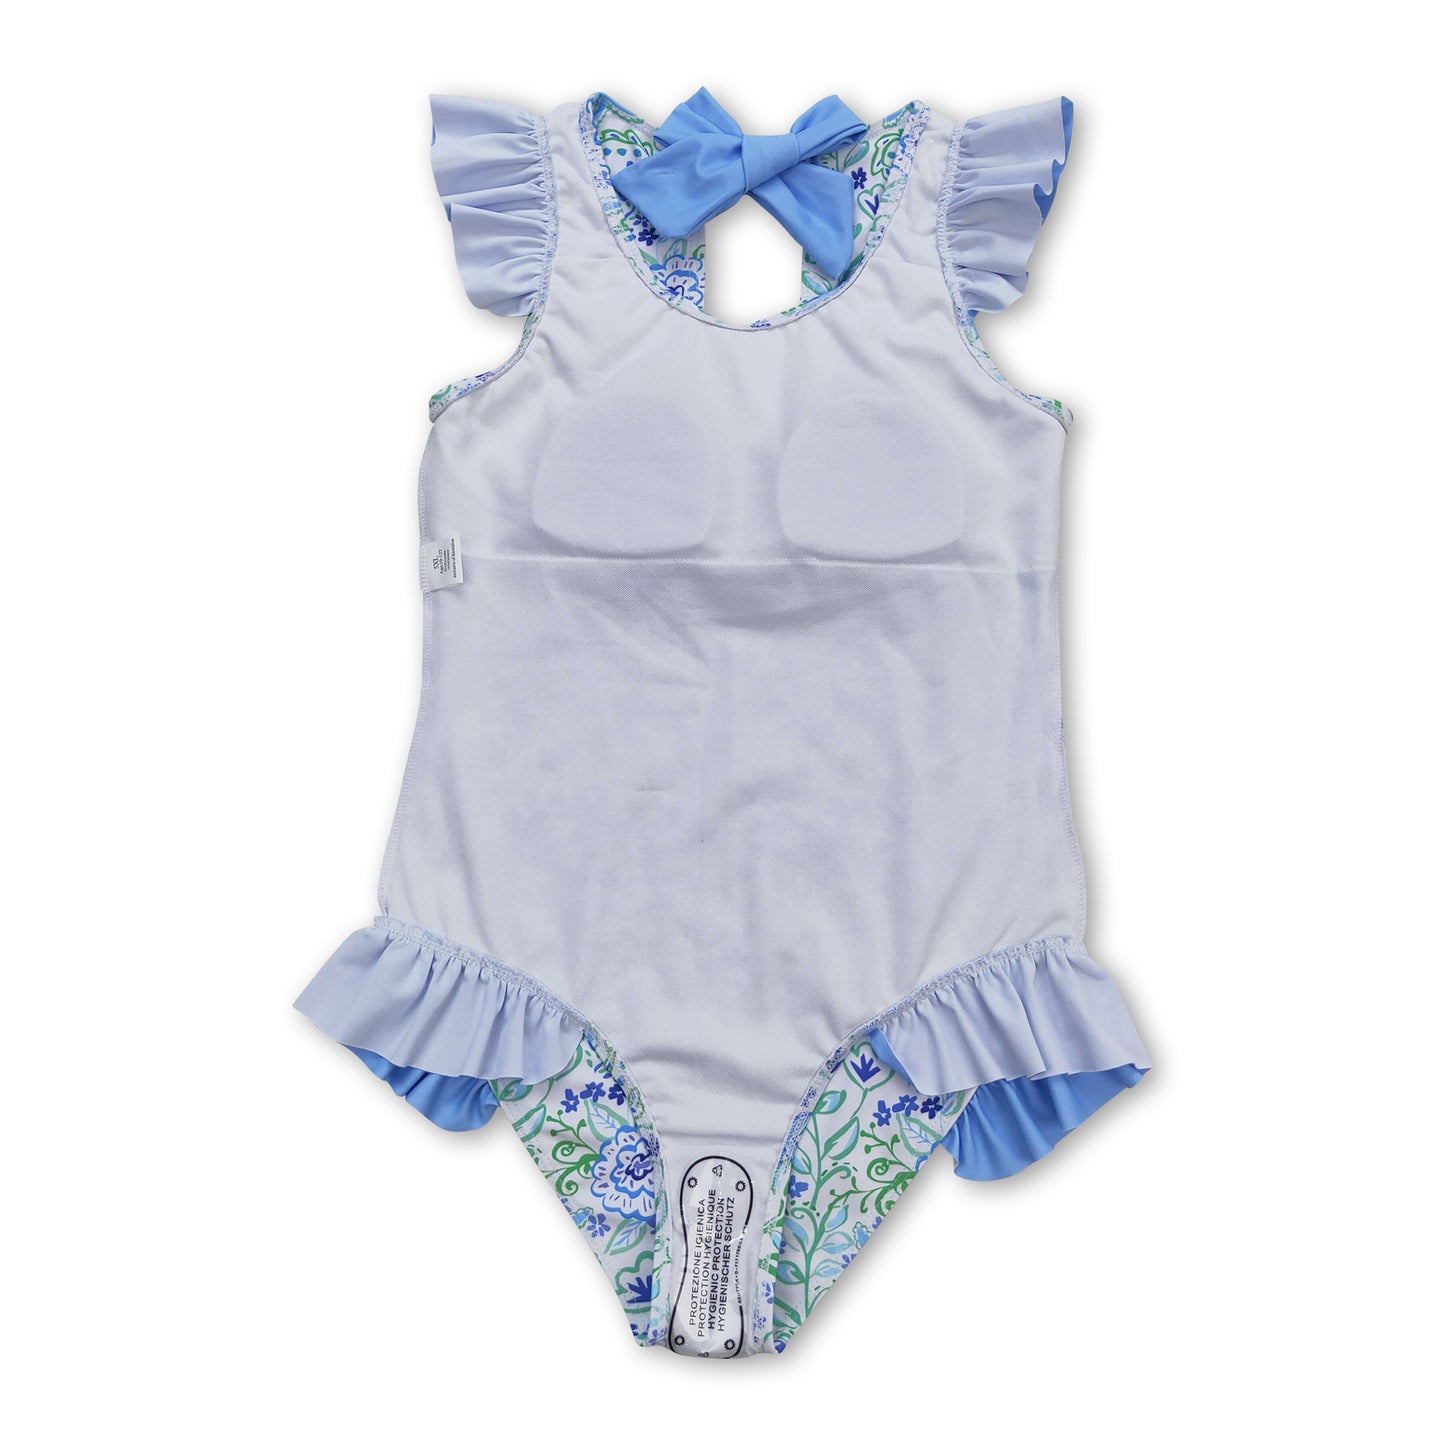 Light blue green floral girls one pc swimsuit